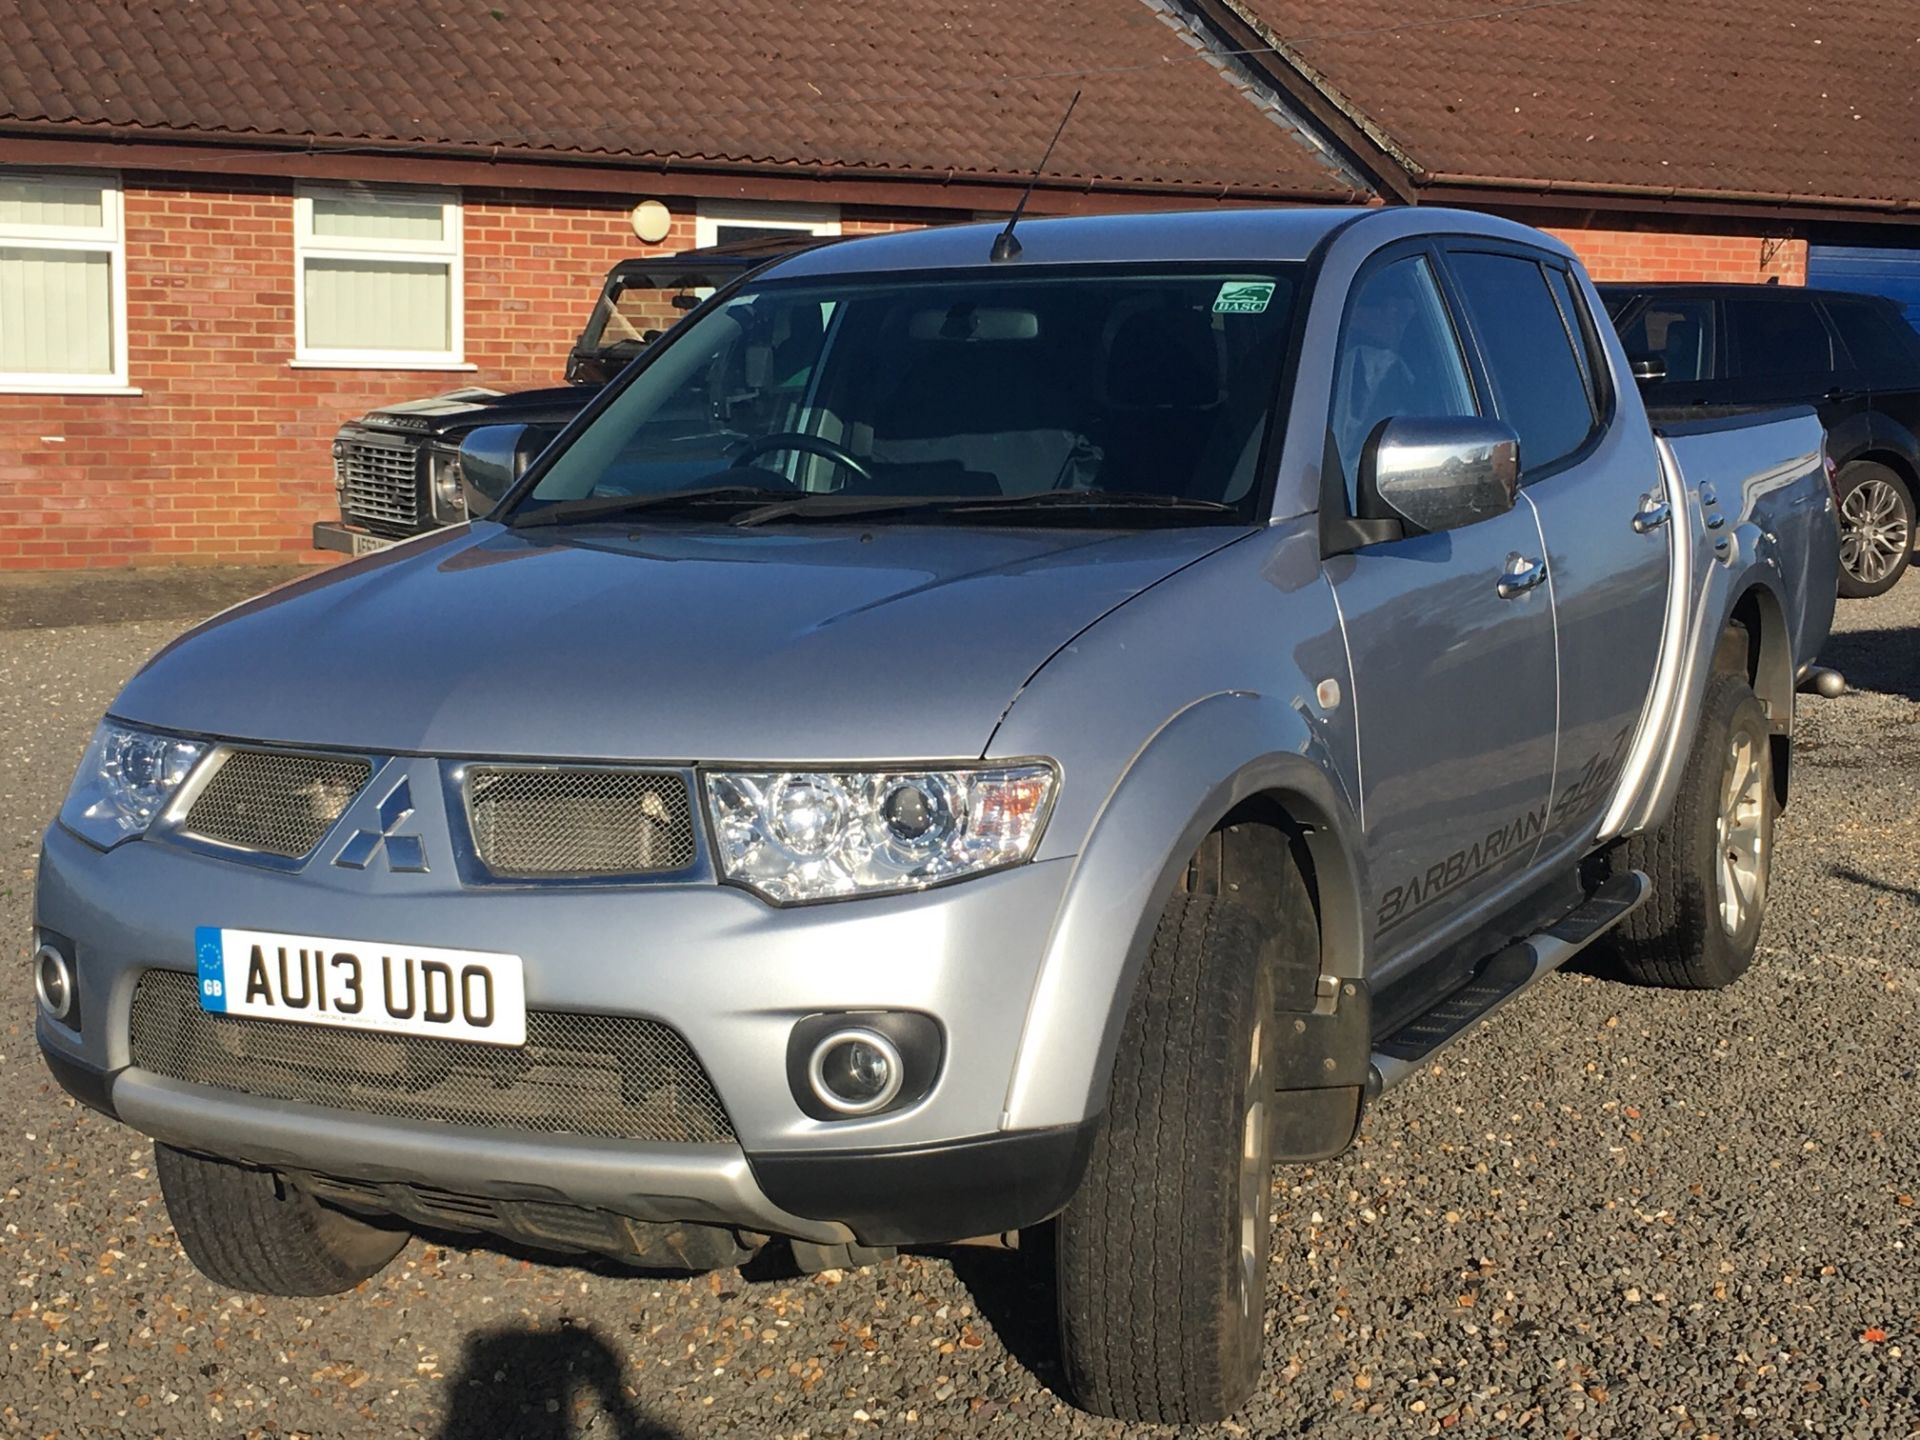 2013 13 reg MITSUBISHI BARBARIAN 4X4 DOUBLE CAB PICK UP TRUCK 1 OWNER FROM NEW, LOW MILEAGE 24k - Image 4 of 22